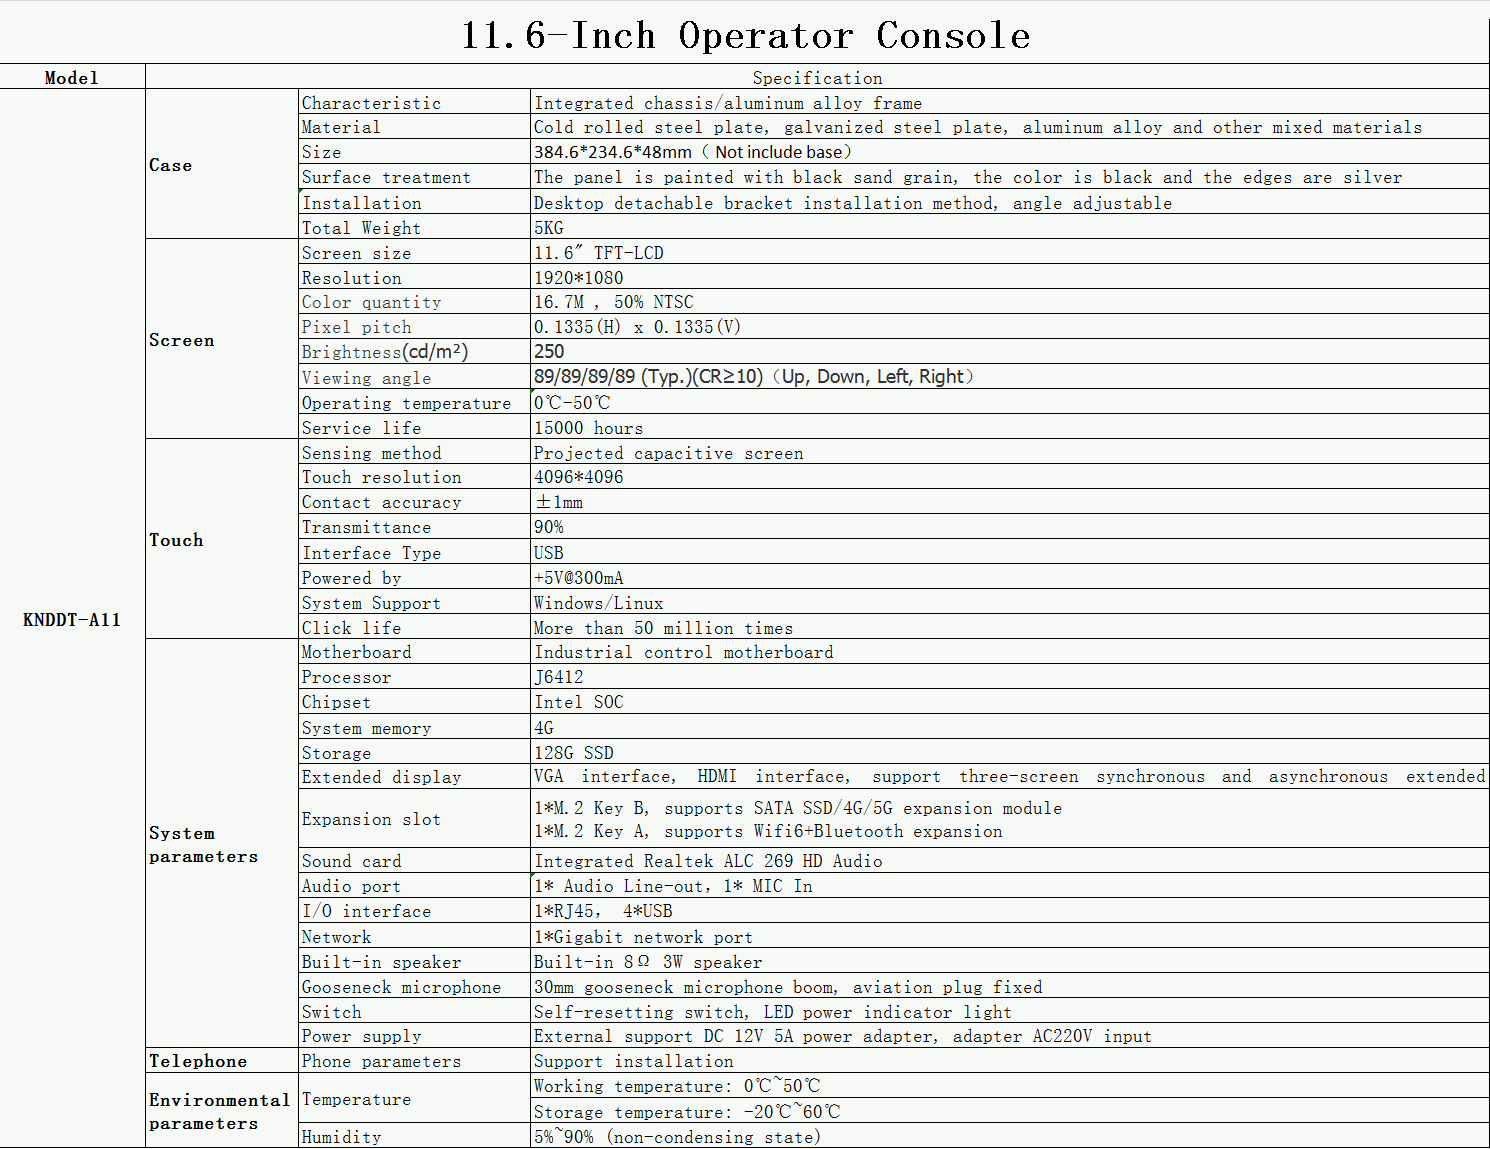 a11 operator console specification